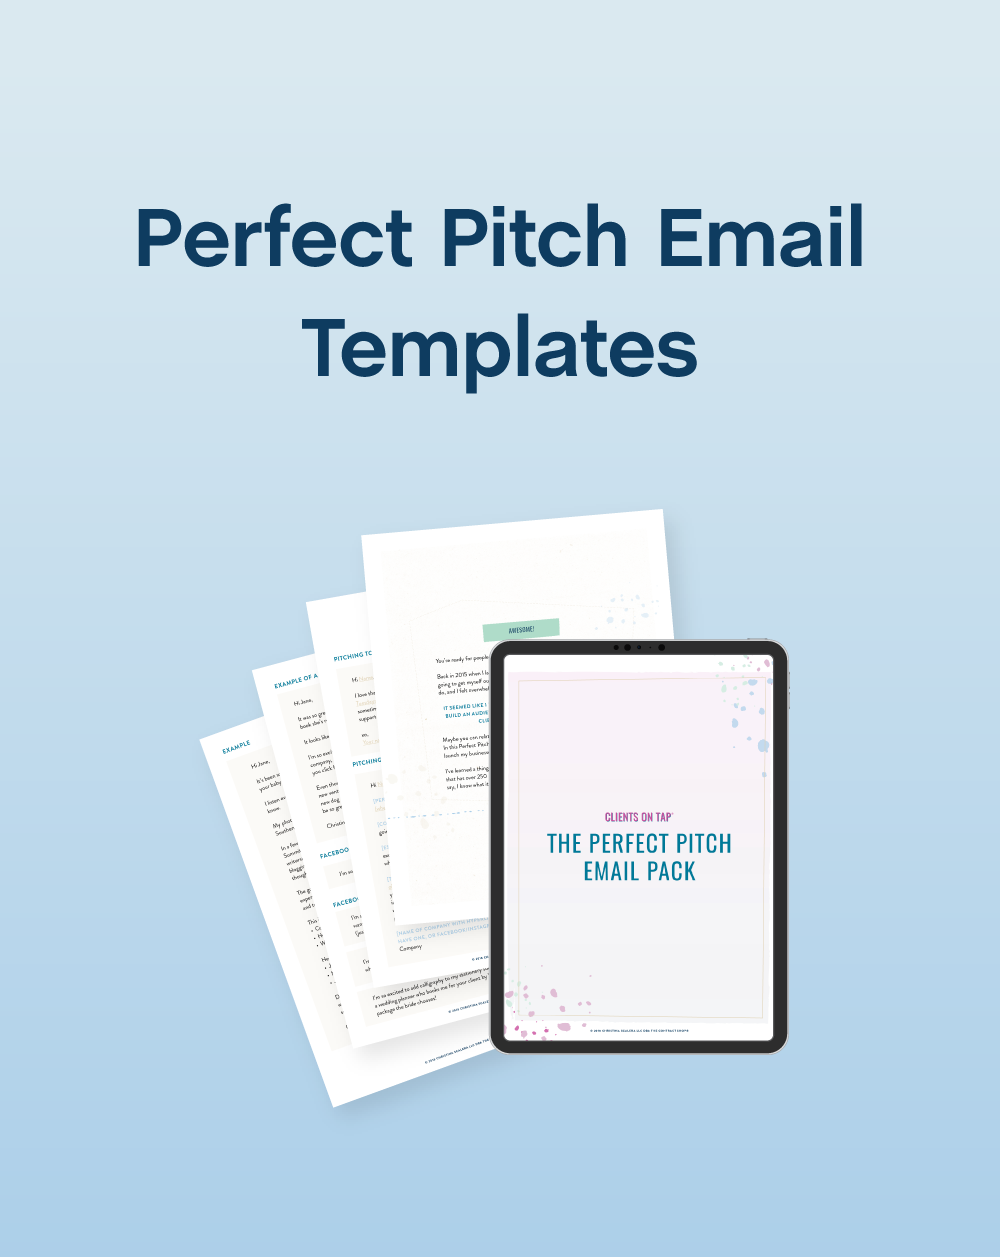 Perfect Pitch Email Templates - The Contract Shop®